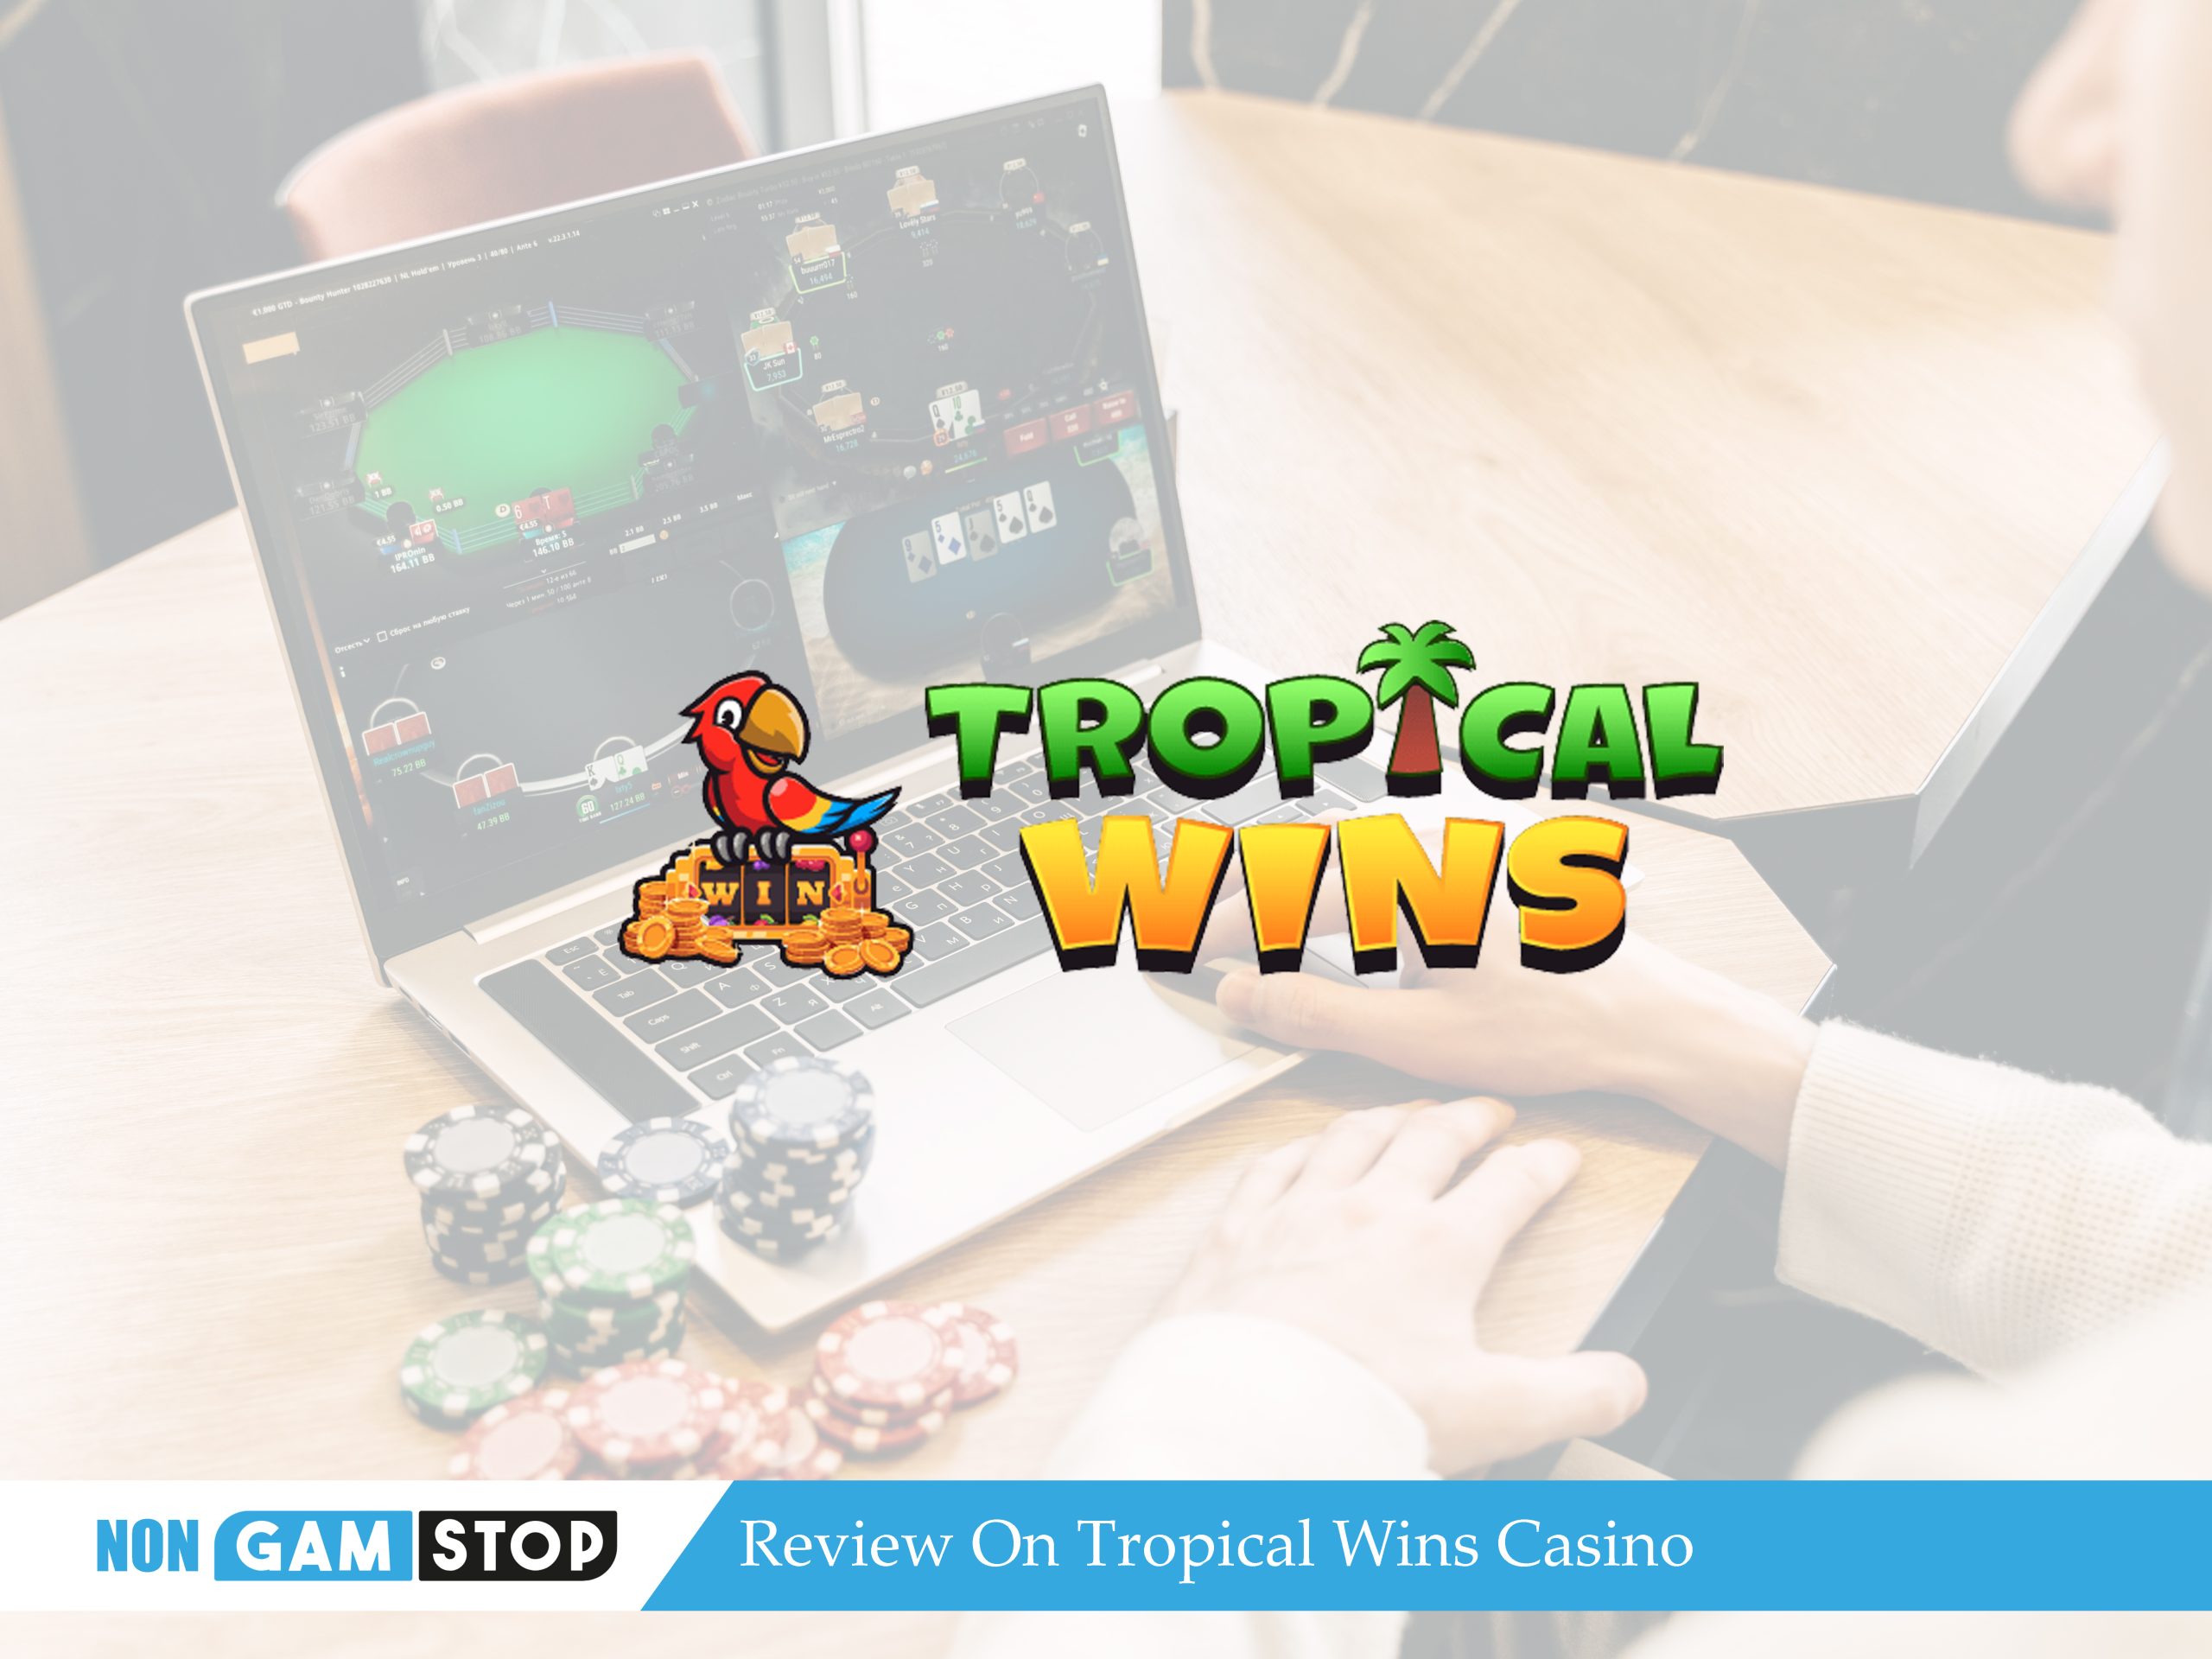 Review On Tropical Wins Casino